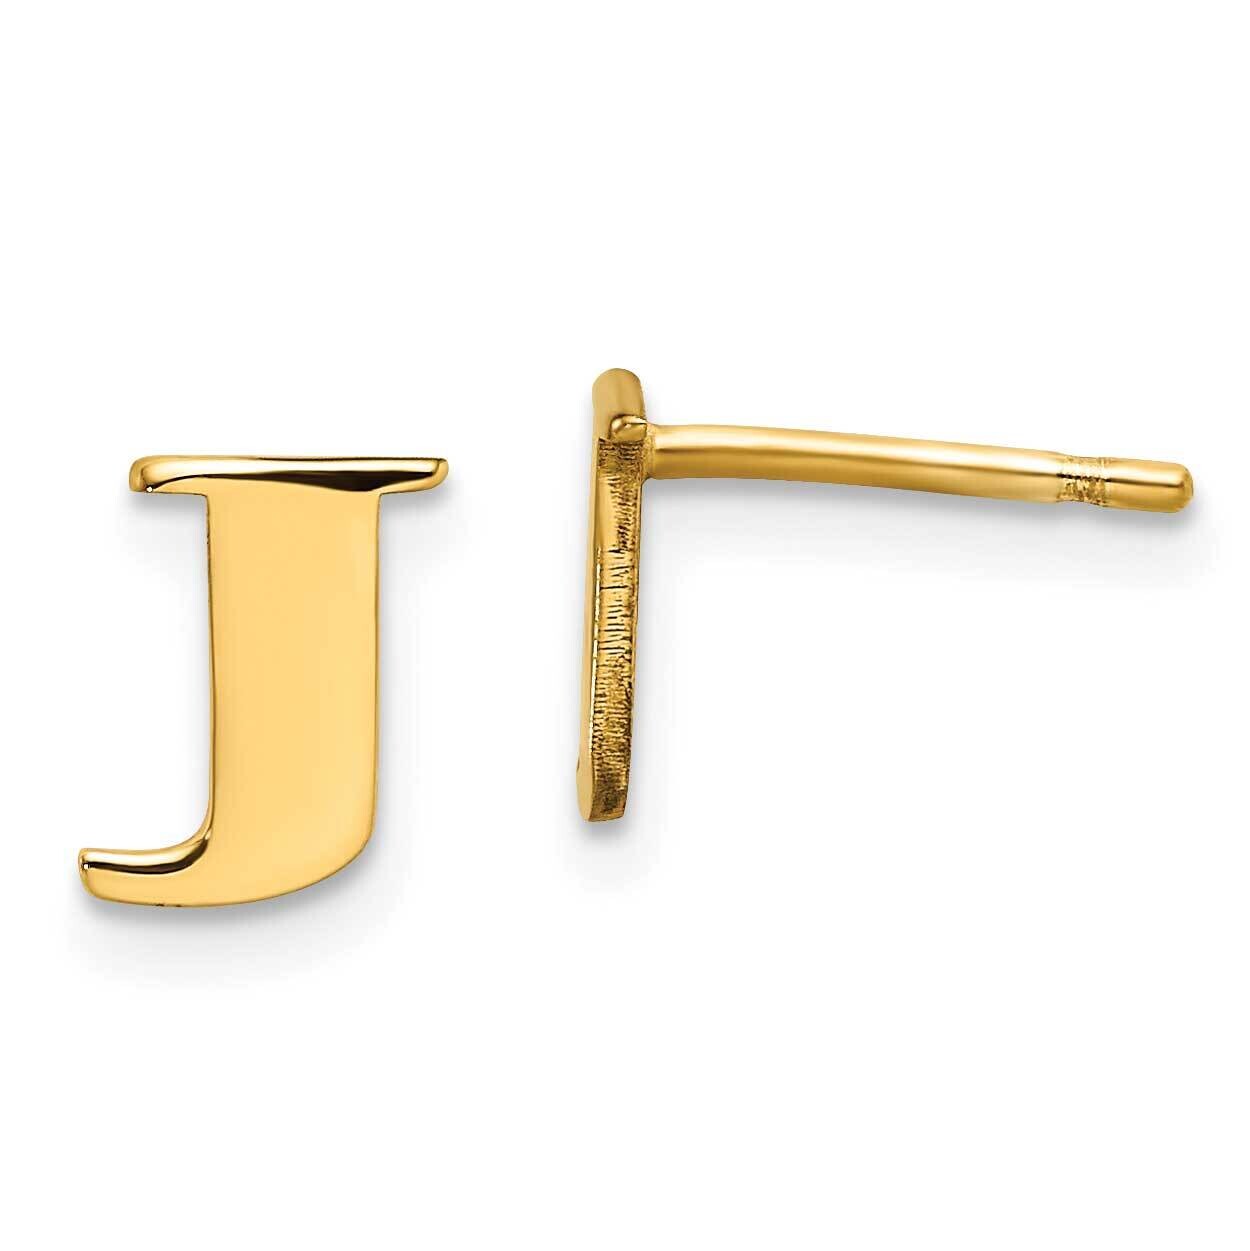 Gold-Plated Letter J Initial Post Earrings Sterling Silver XNE46GP/J